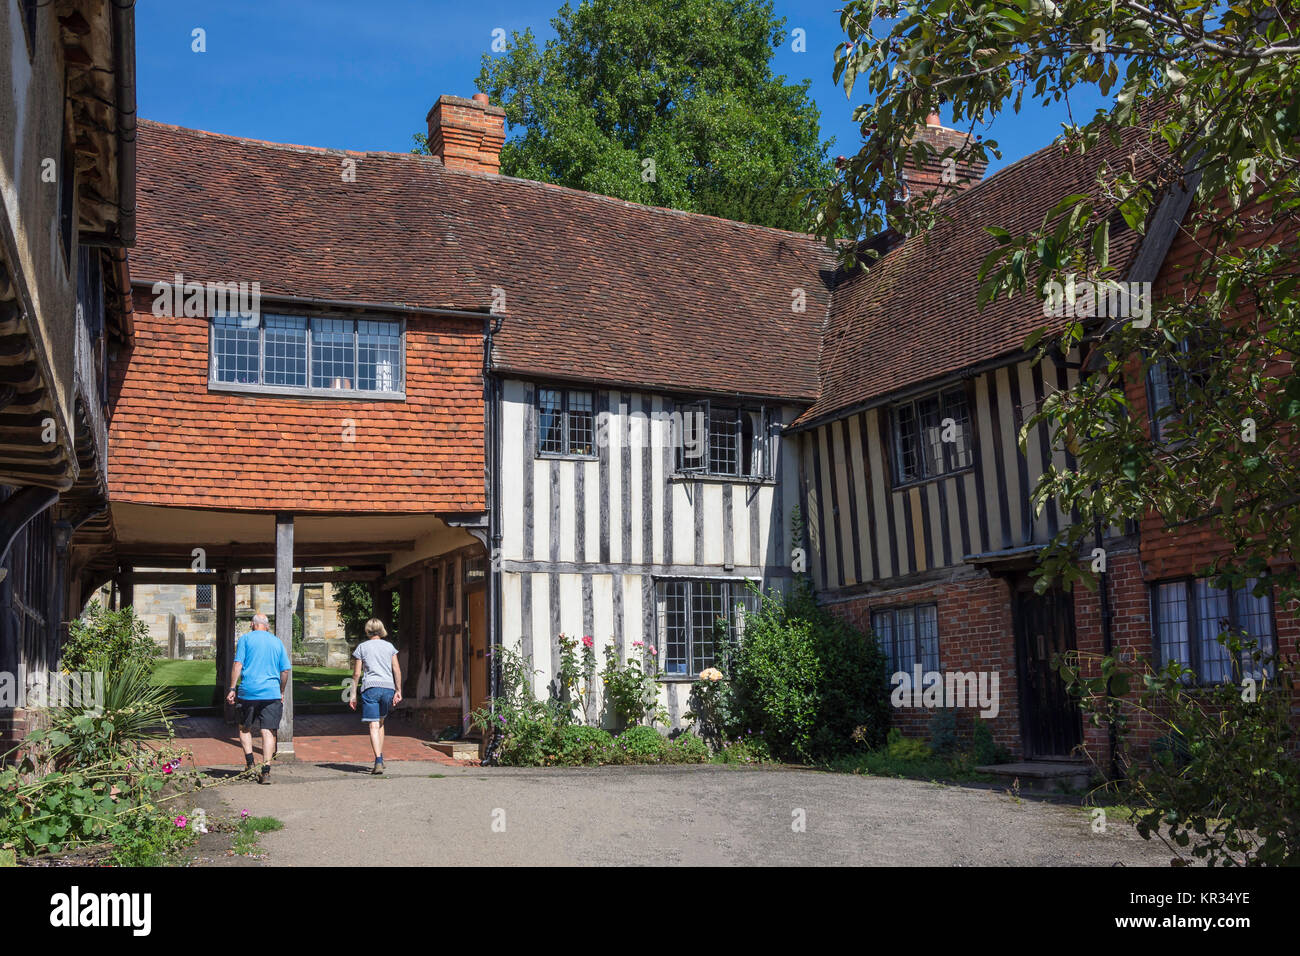 Timber-framed courtyard in front of St John the Baptist Church, Rogues Hill, Penshurst, Kent, England, United Kingdom Stock Photo